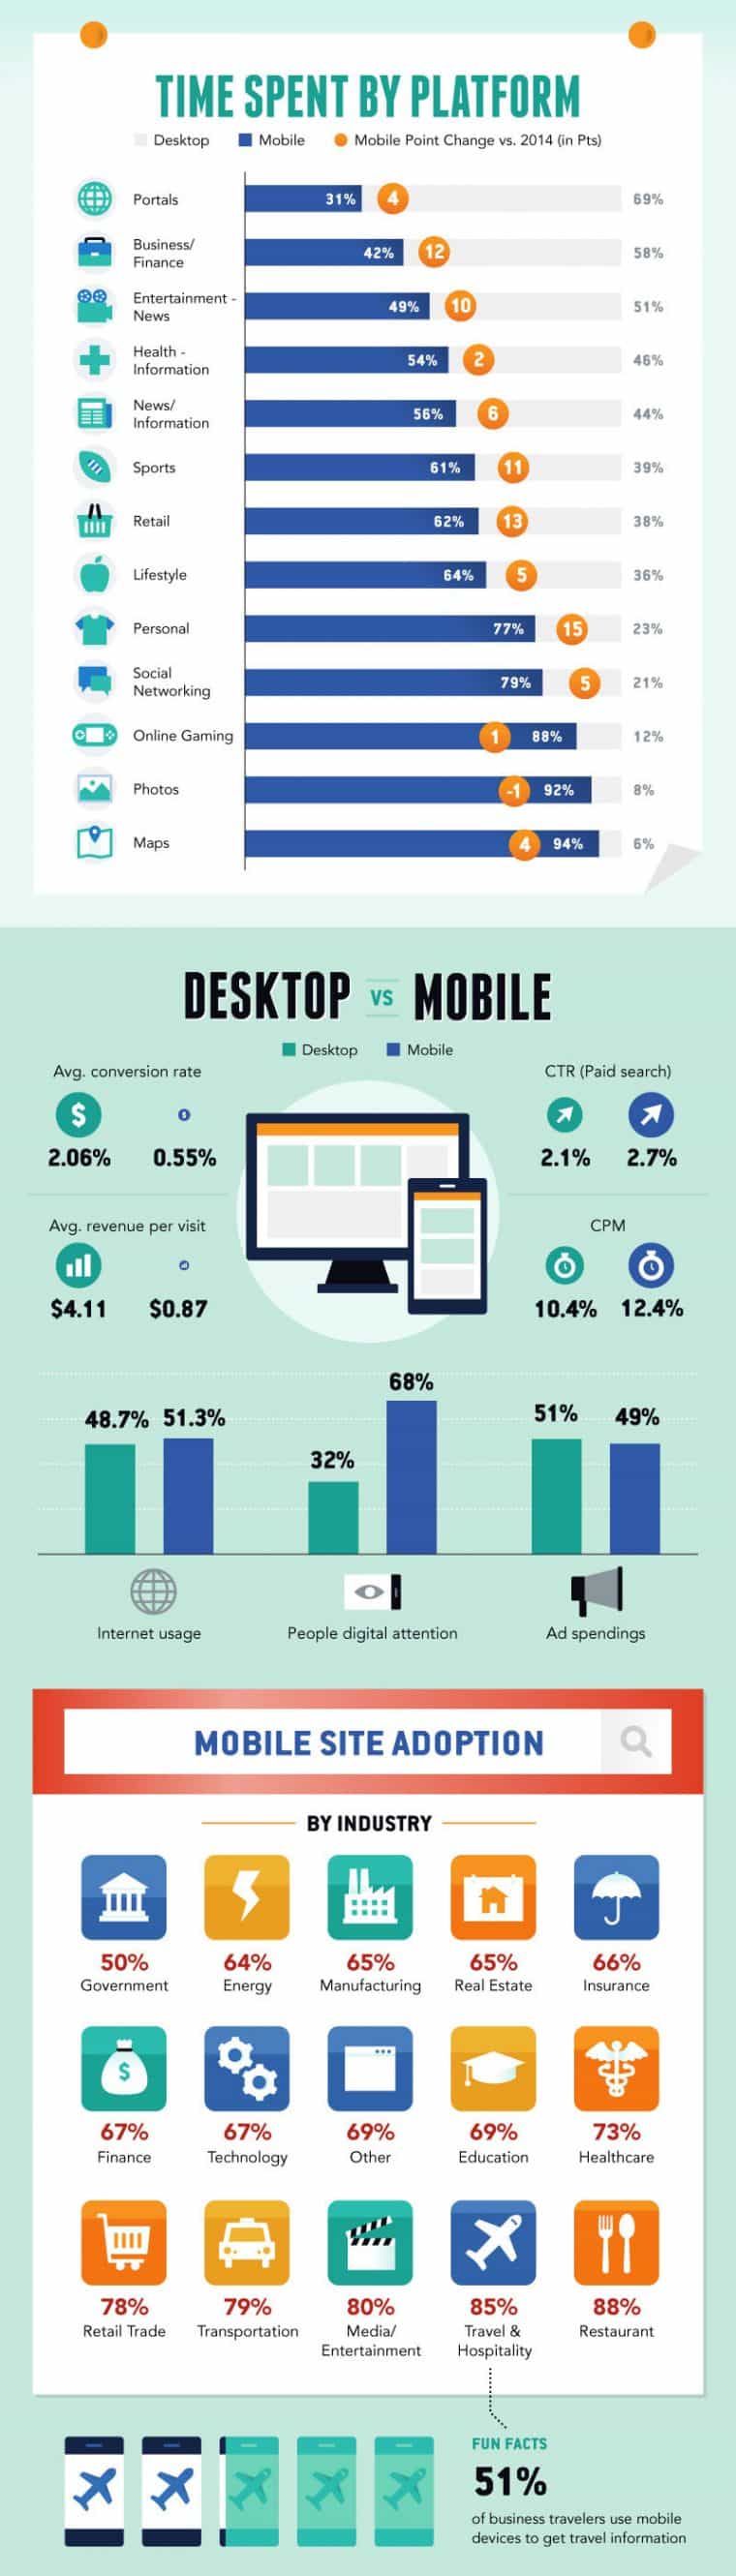 Mobile marketing 2 760x2661 Why You Should Have a Mobile Website Infographic